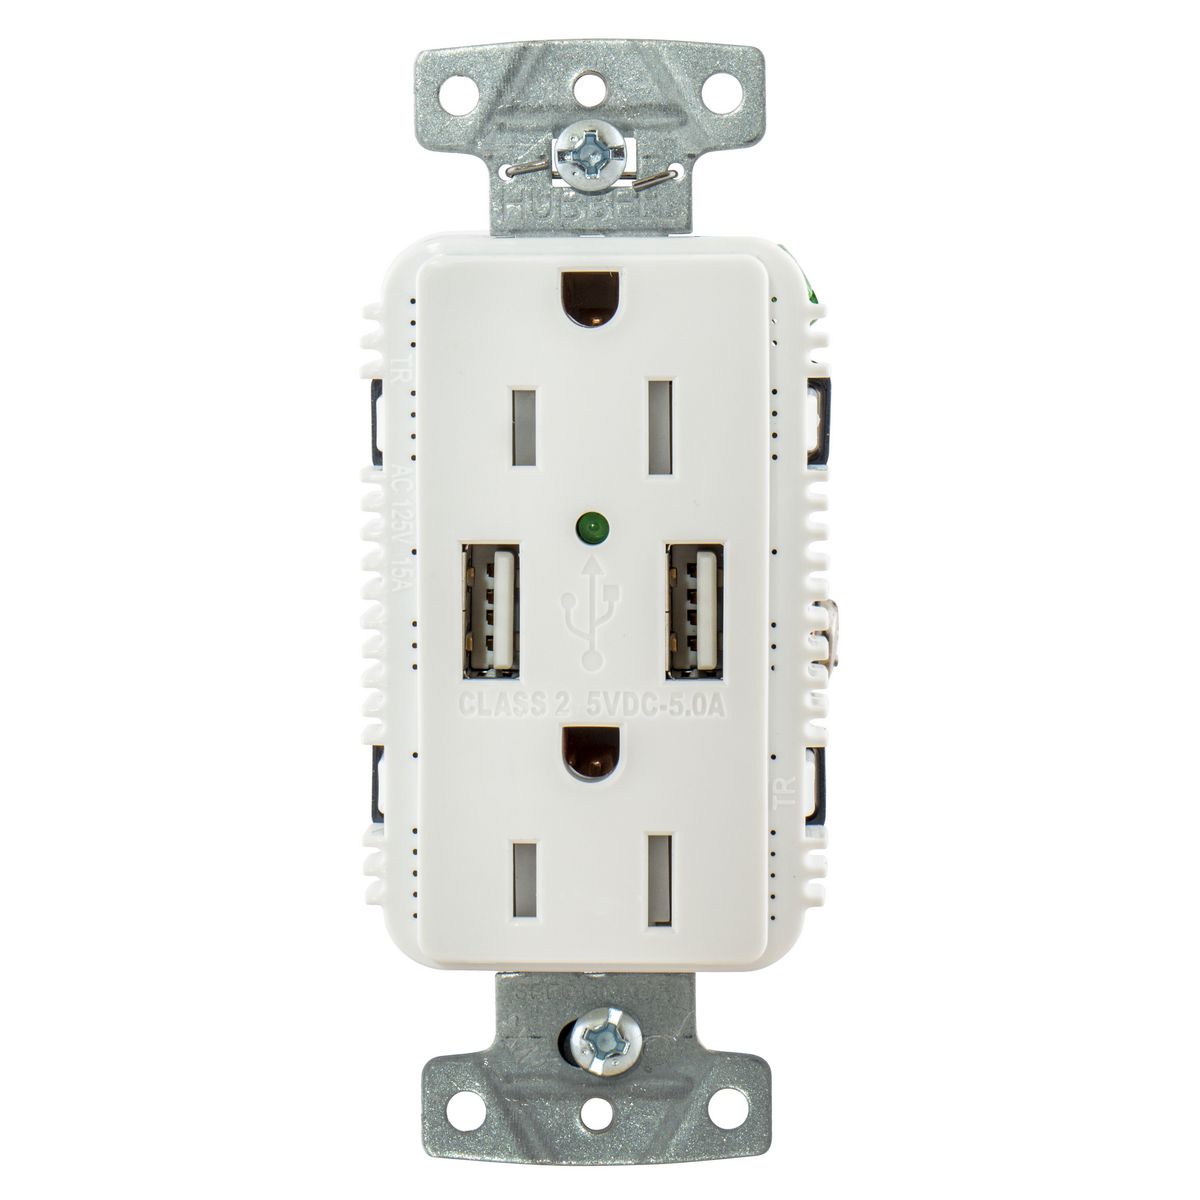 Hubbell HUBUSB15A5W White Outlet Dual 15 Amp 125v 2-Pole and Dual 5 Amp 5v USB Ports